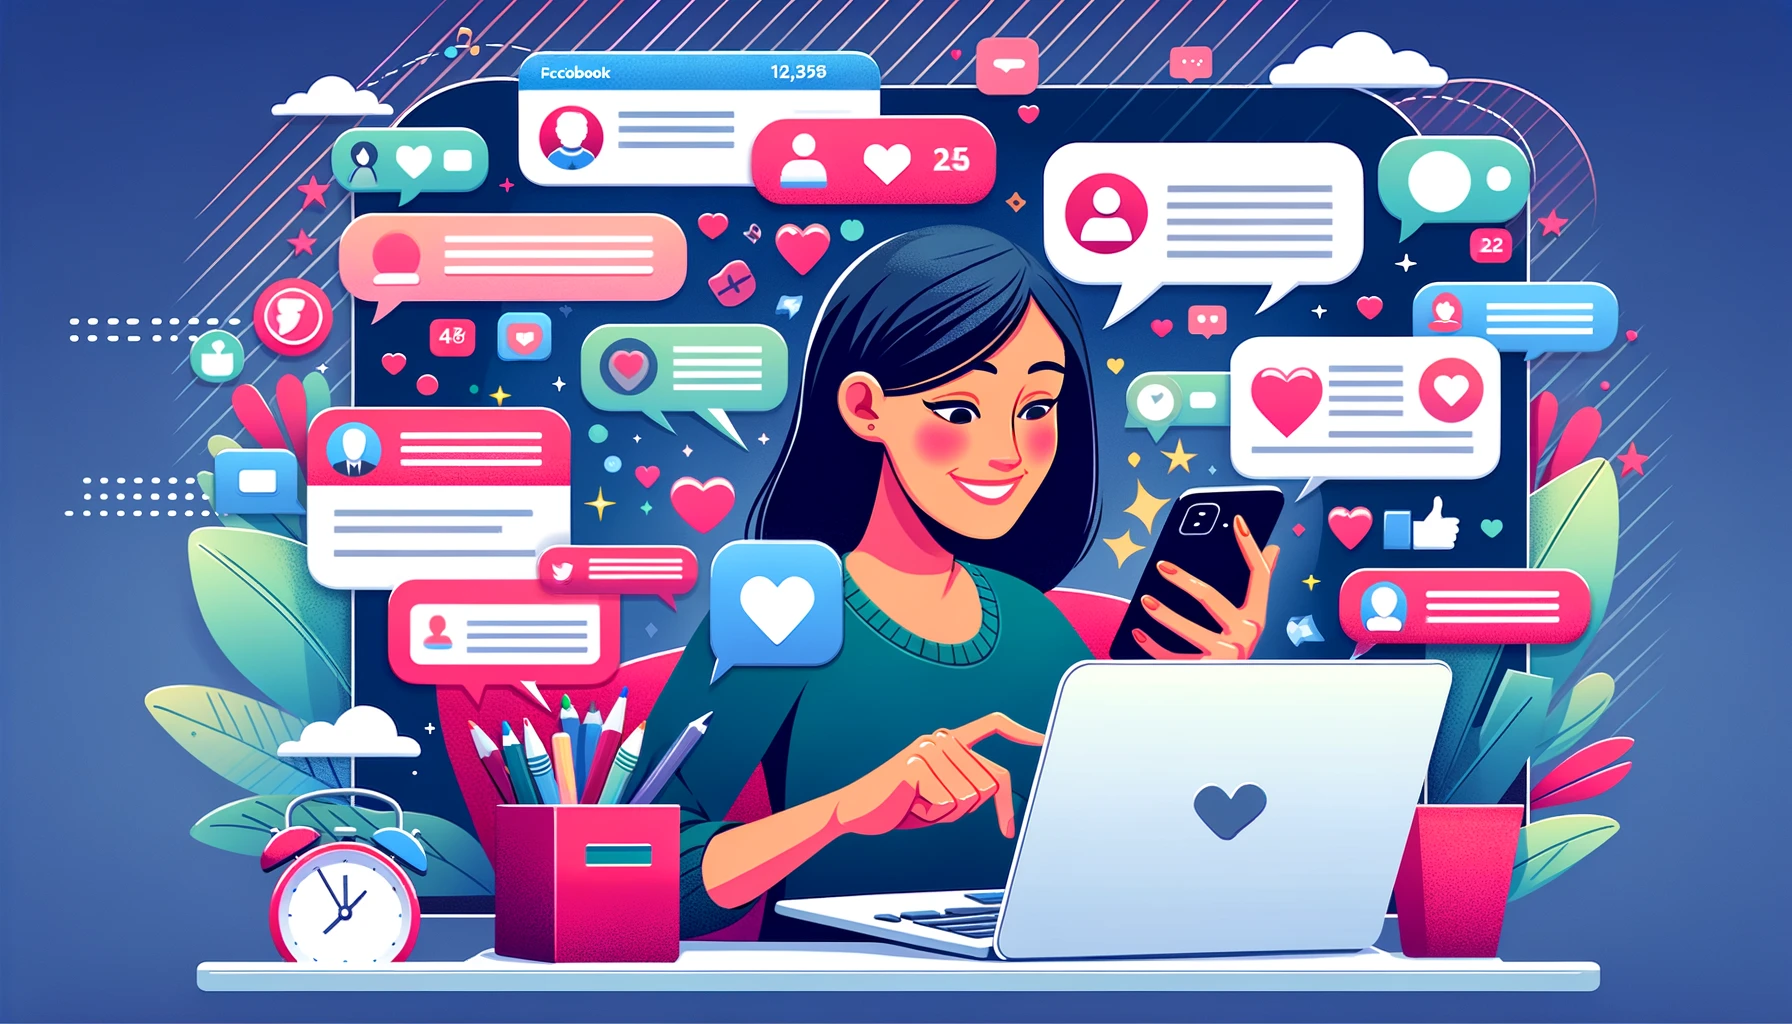 An illustration of a small business owner actively engaging with followers on social media. The scene includes a smartphone and laptop displaying social media apps with notifications, comments, and likes. The business owner is smiling and typing a response, surrounded by icons of hearts, thumbs up, and speech bubbles, highlighting the importance of social media engagement in community-driven branding.